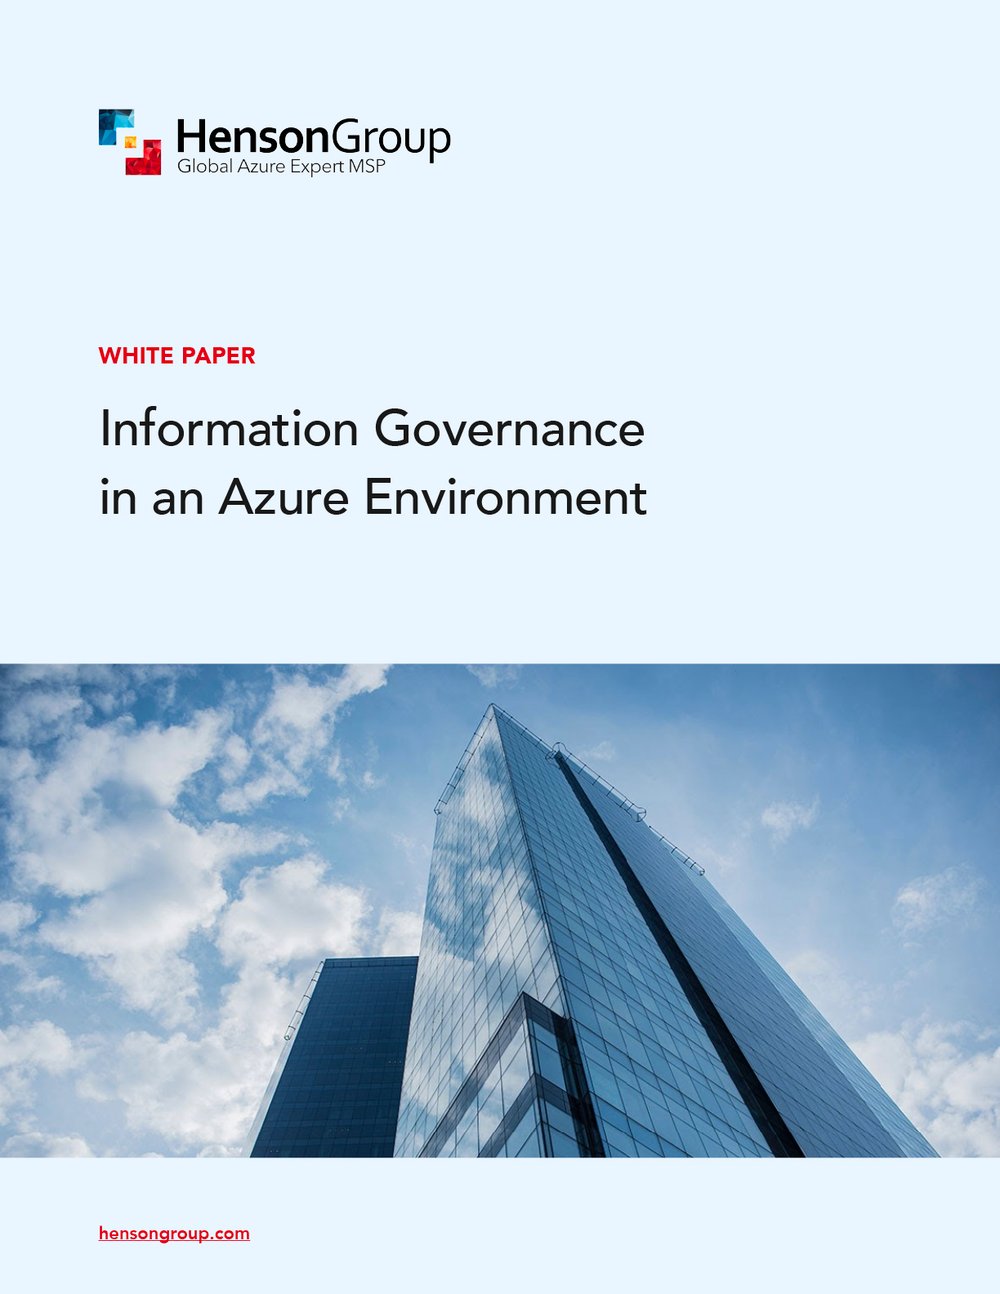 Henson-Group-White-Paper-Information-Governance-in-an-Azure-Environment-IMAGES-Cover